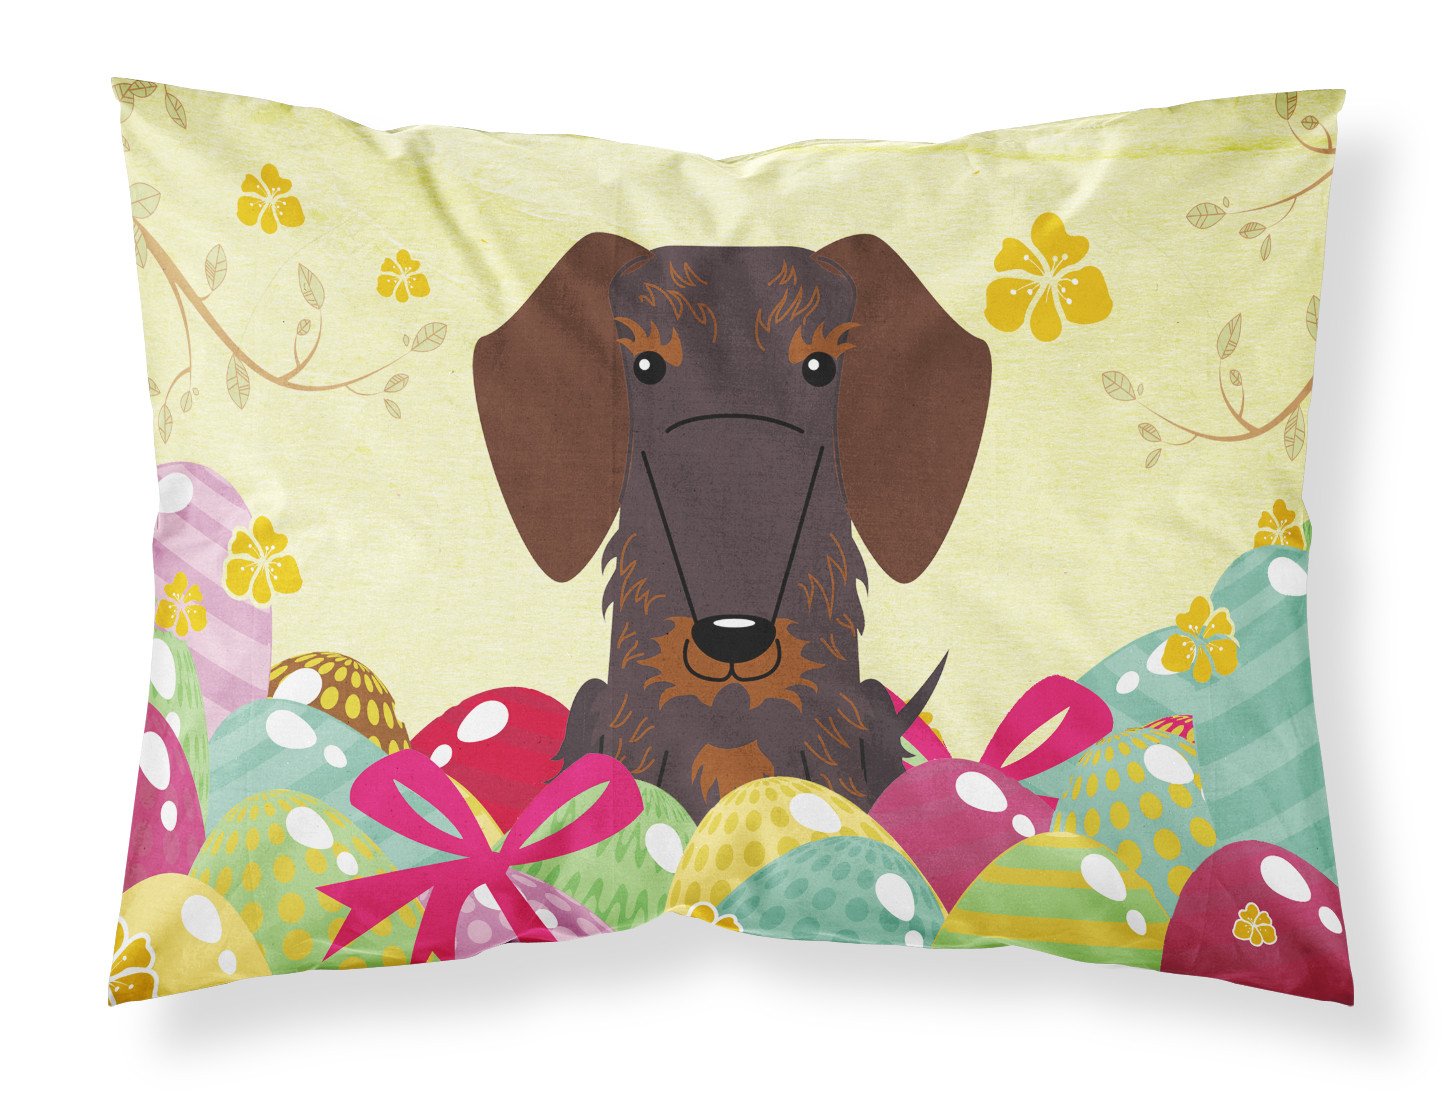 Easter Eggs Wire Haired Dachshund Chocolate Fabric Standard Pillowcase BB6129PILLOWCASE by Caroline's Treasures